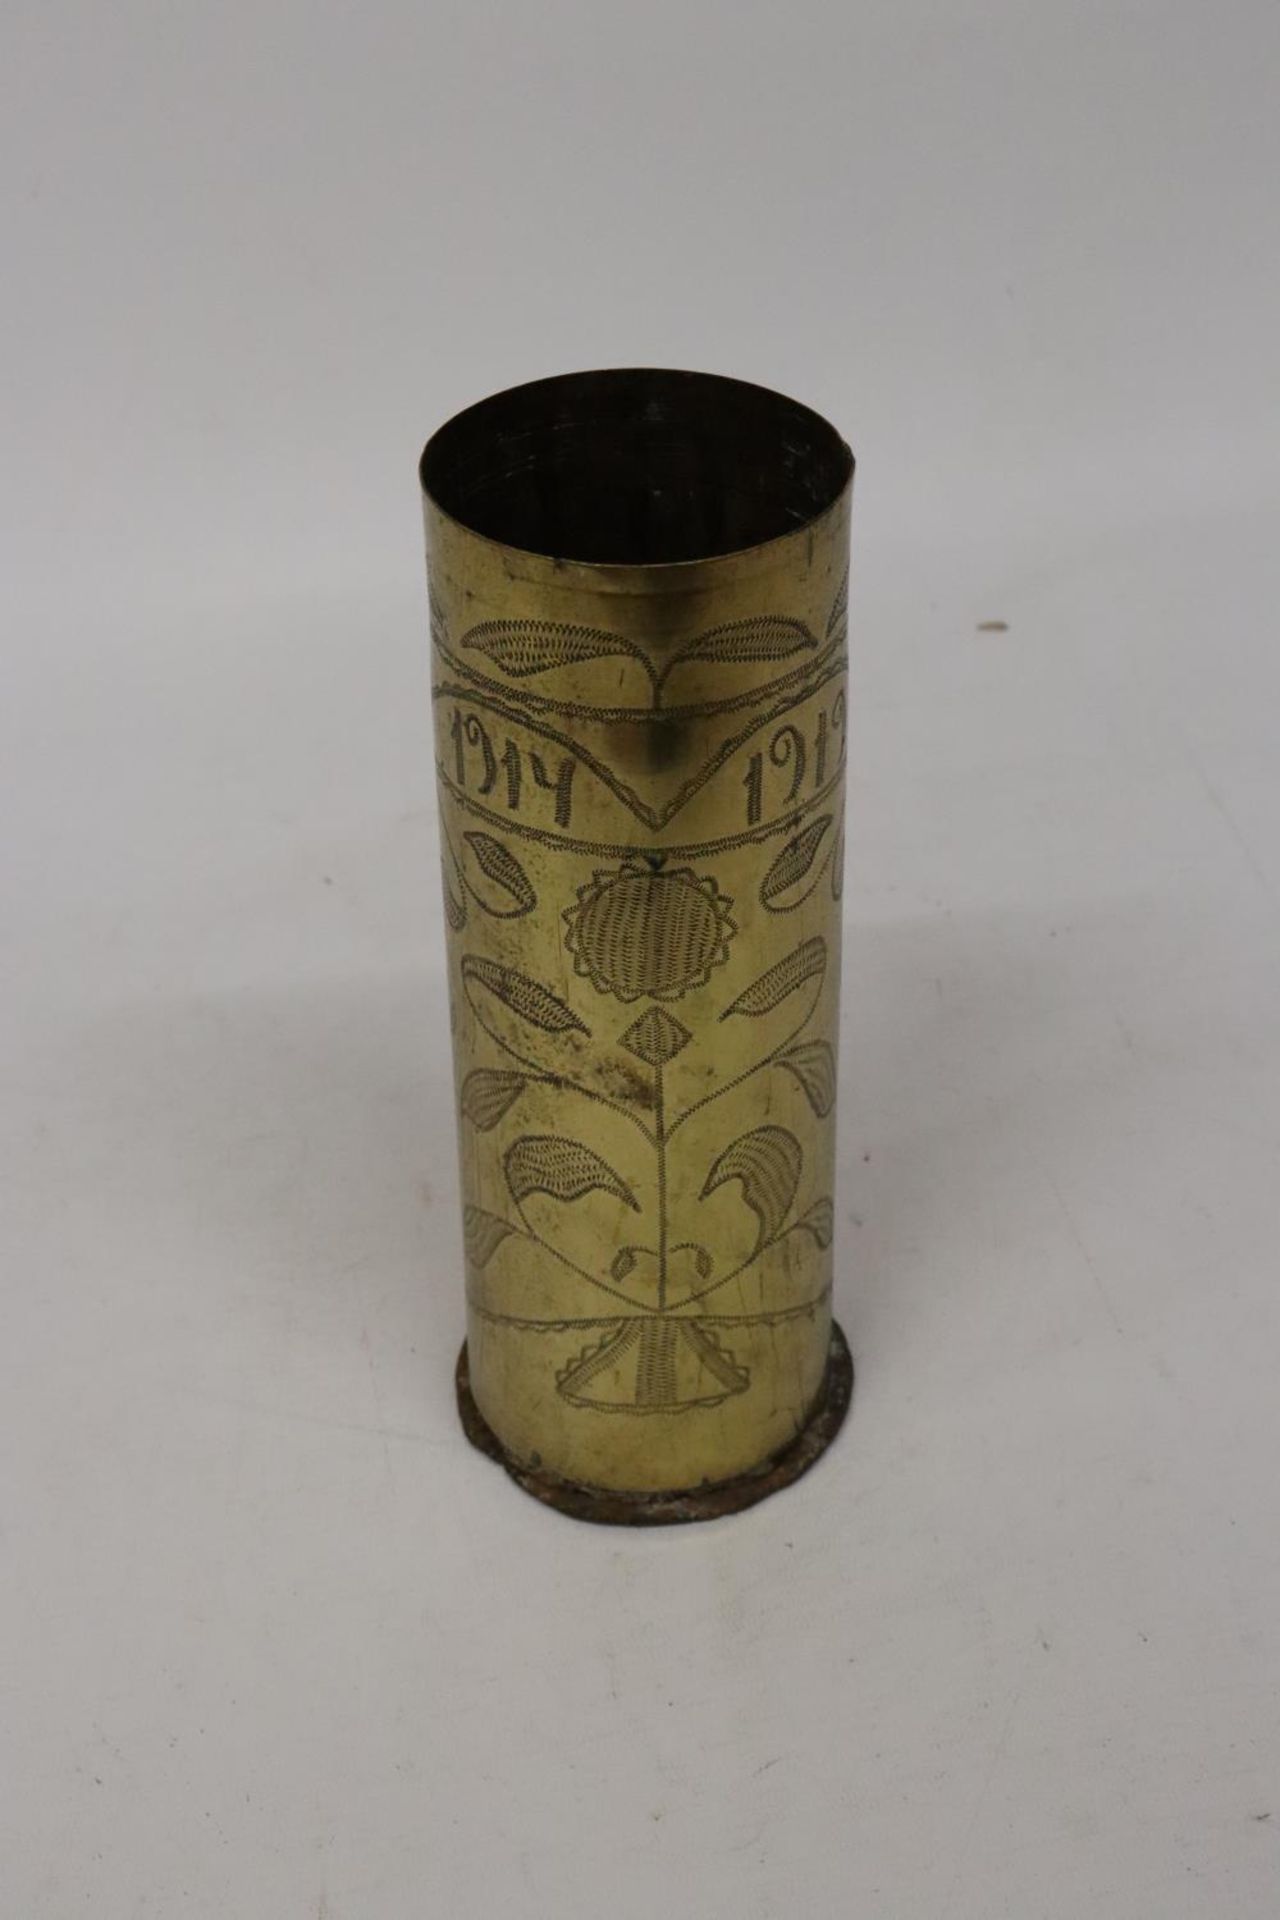 A WORLD WAR I TRENCH ART SHELL DATED 1914-19, HEIGHT 23CM - Image 2 of 4